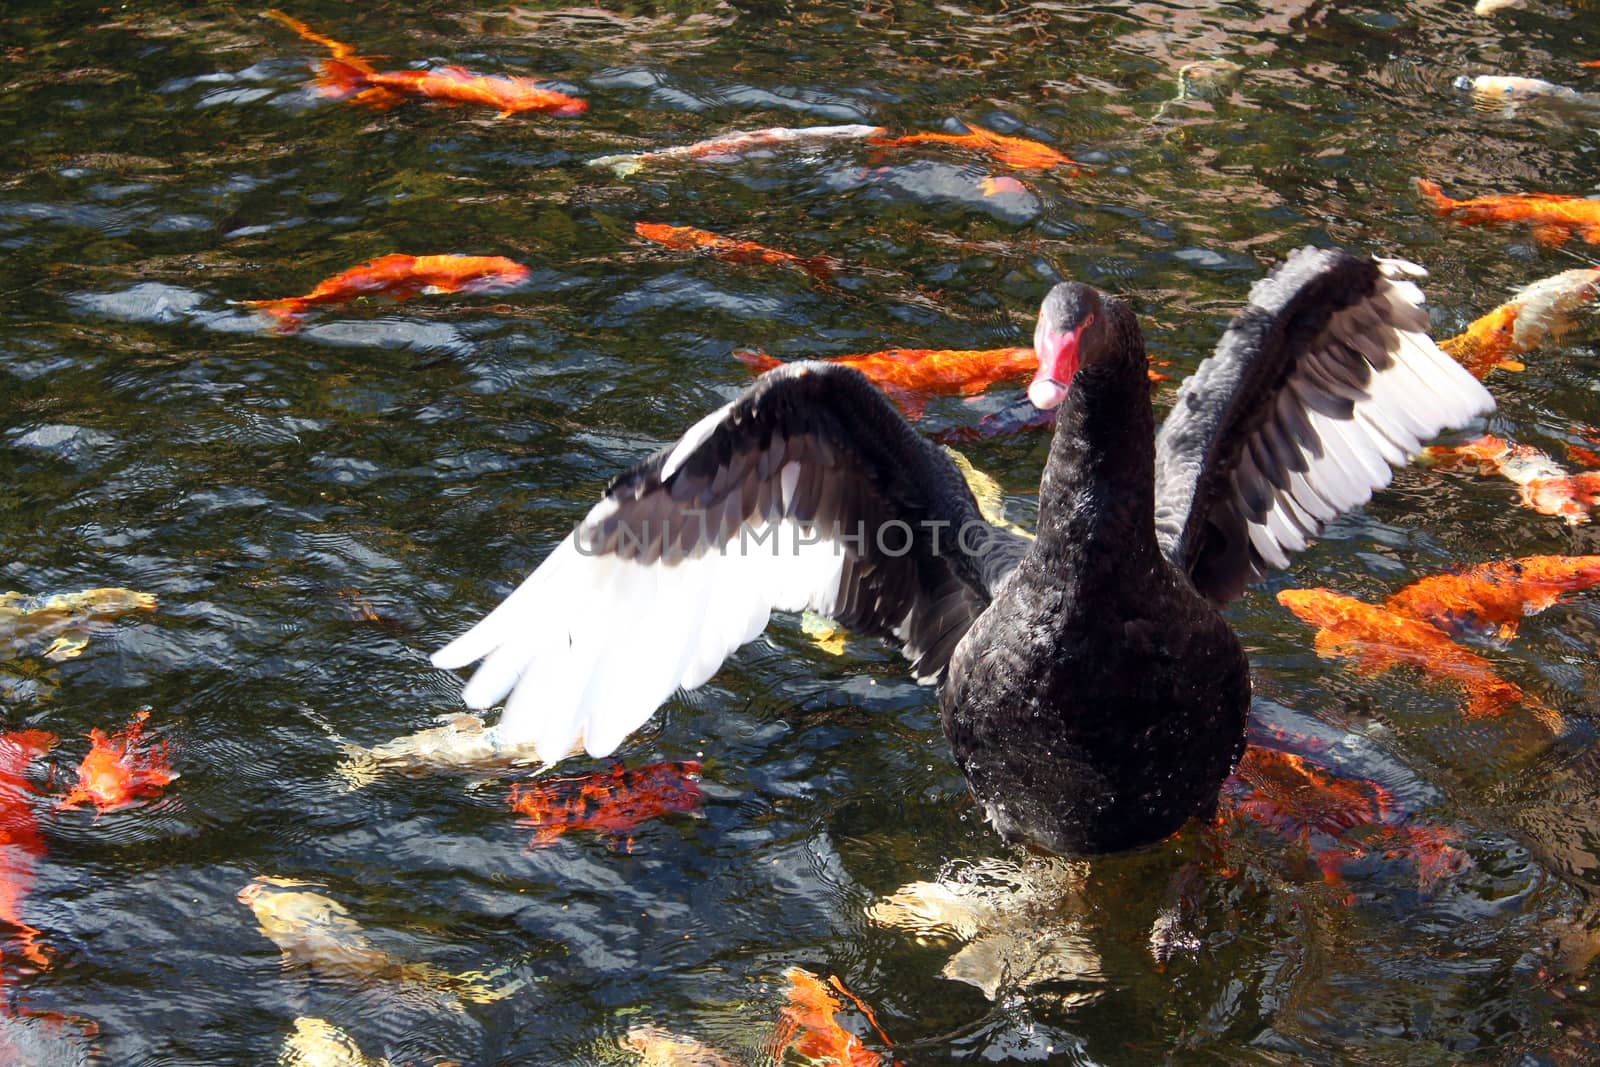 Several koi fishes swim around a black swan with open wings